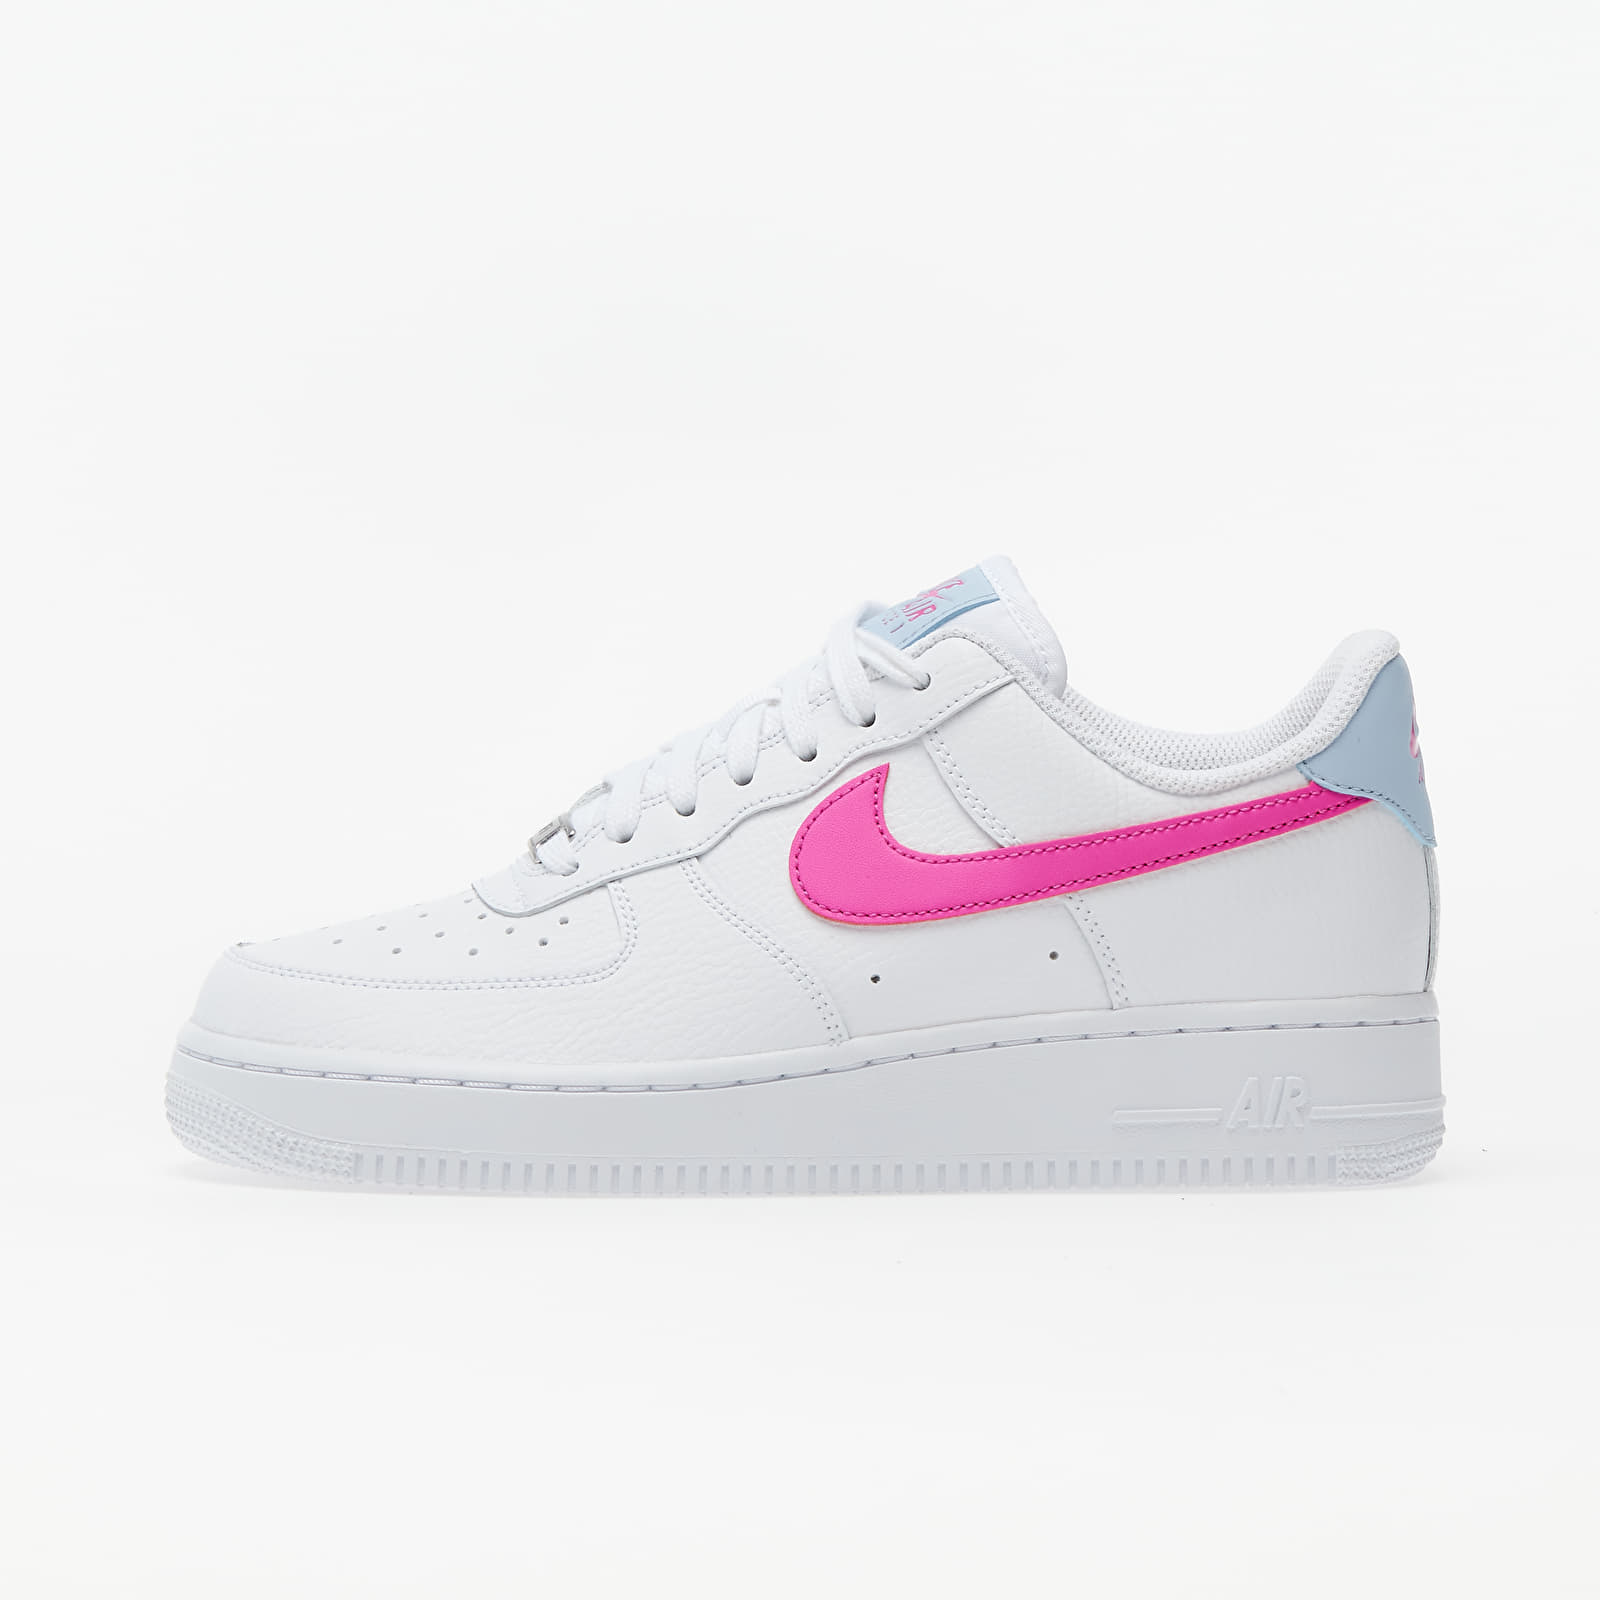 Nike Wmns Air Force 1 ’07 White/ Fire Pink-Hydrogen Blue 63280